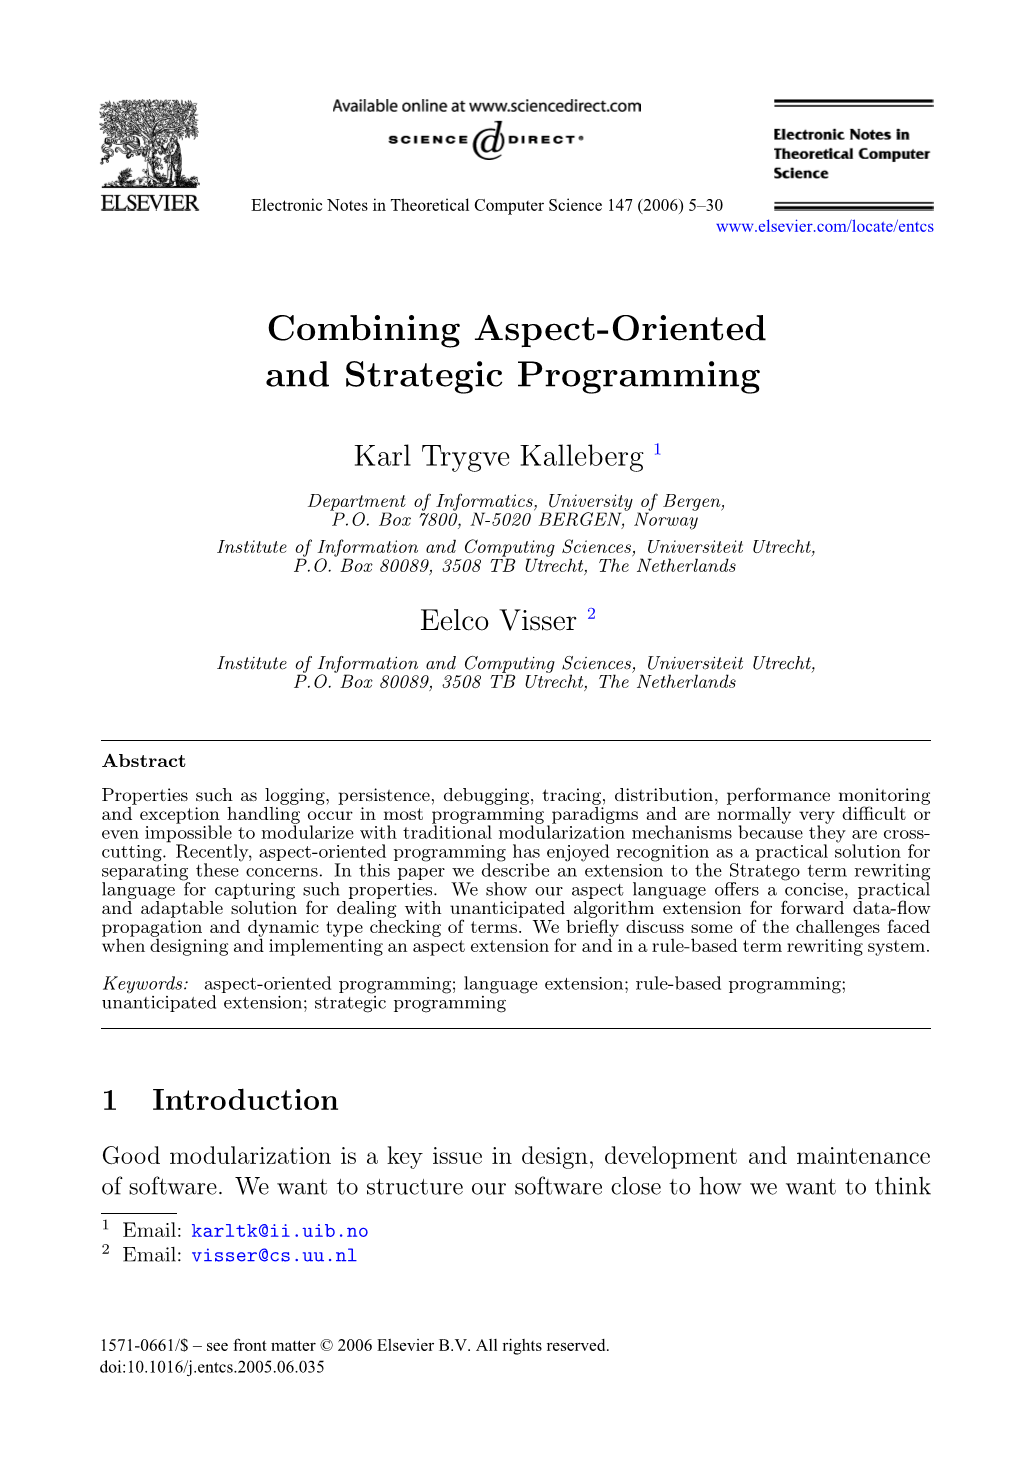 Combining Aspect-Oriented and Strategic Programming